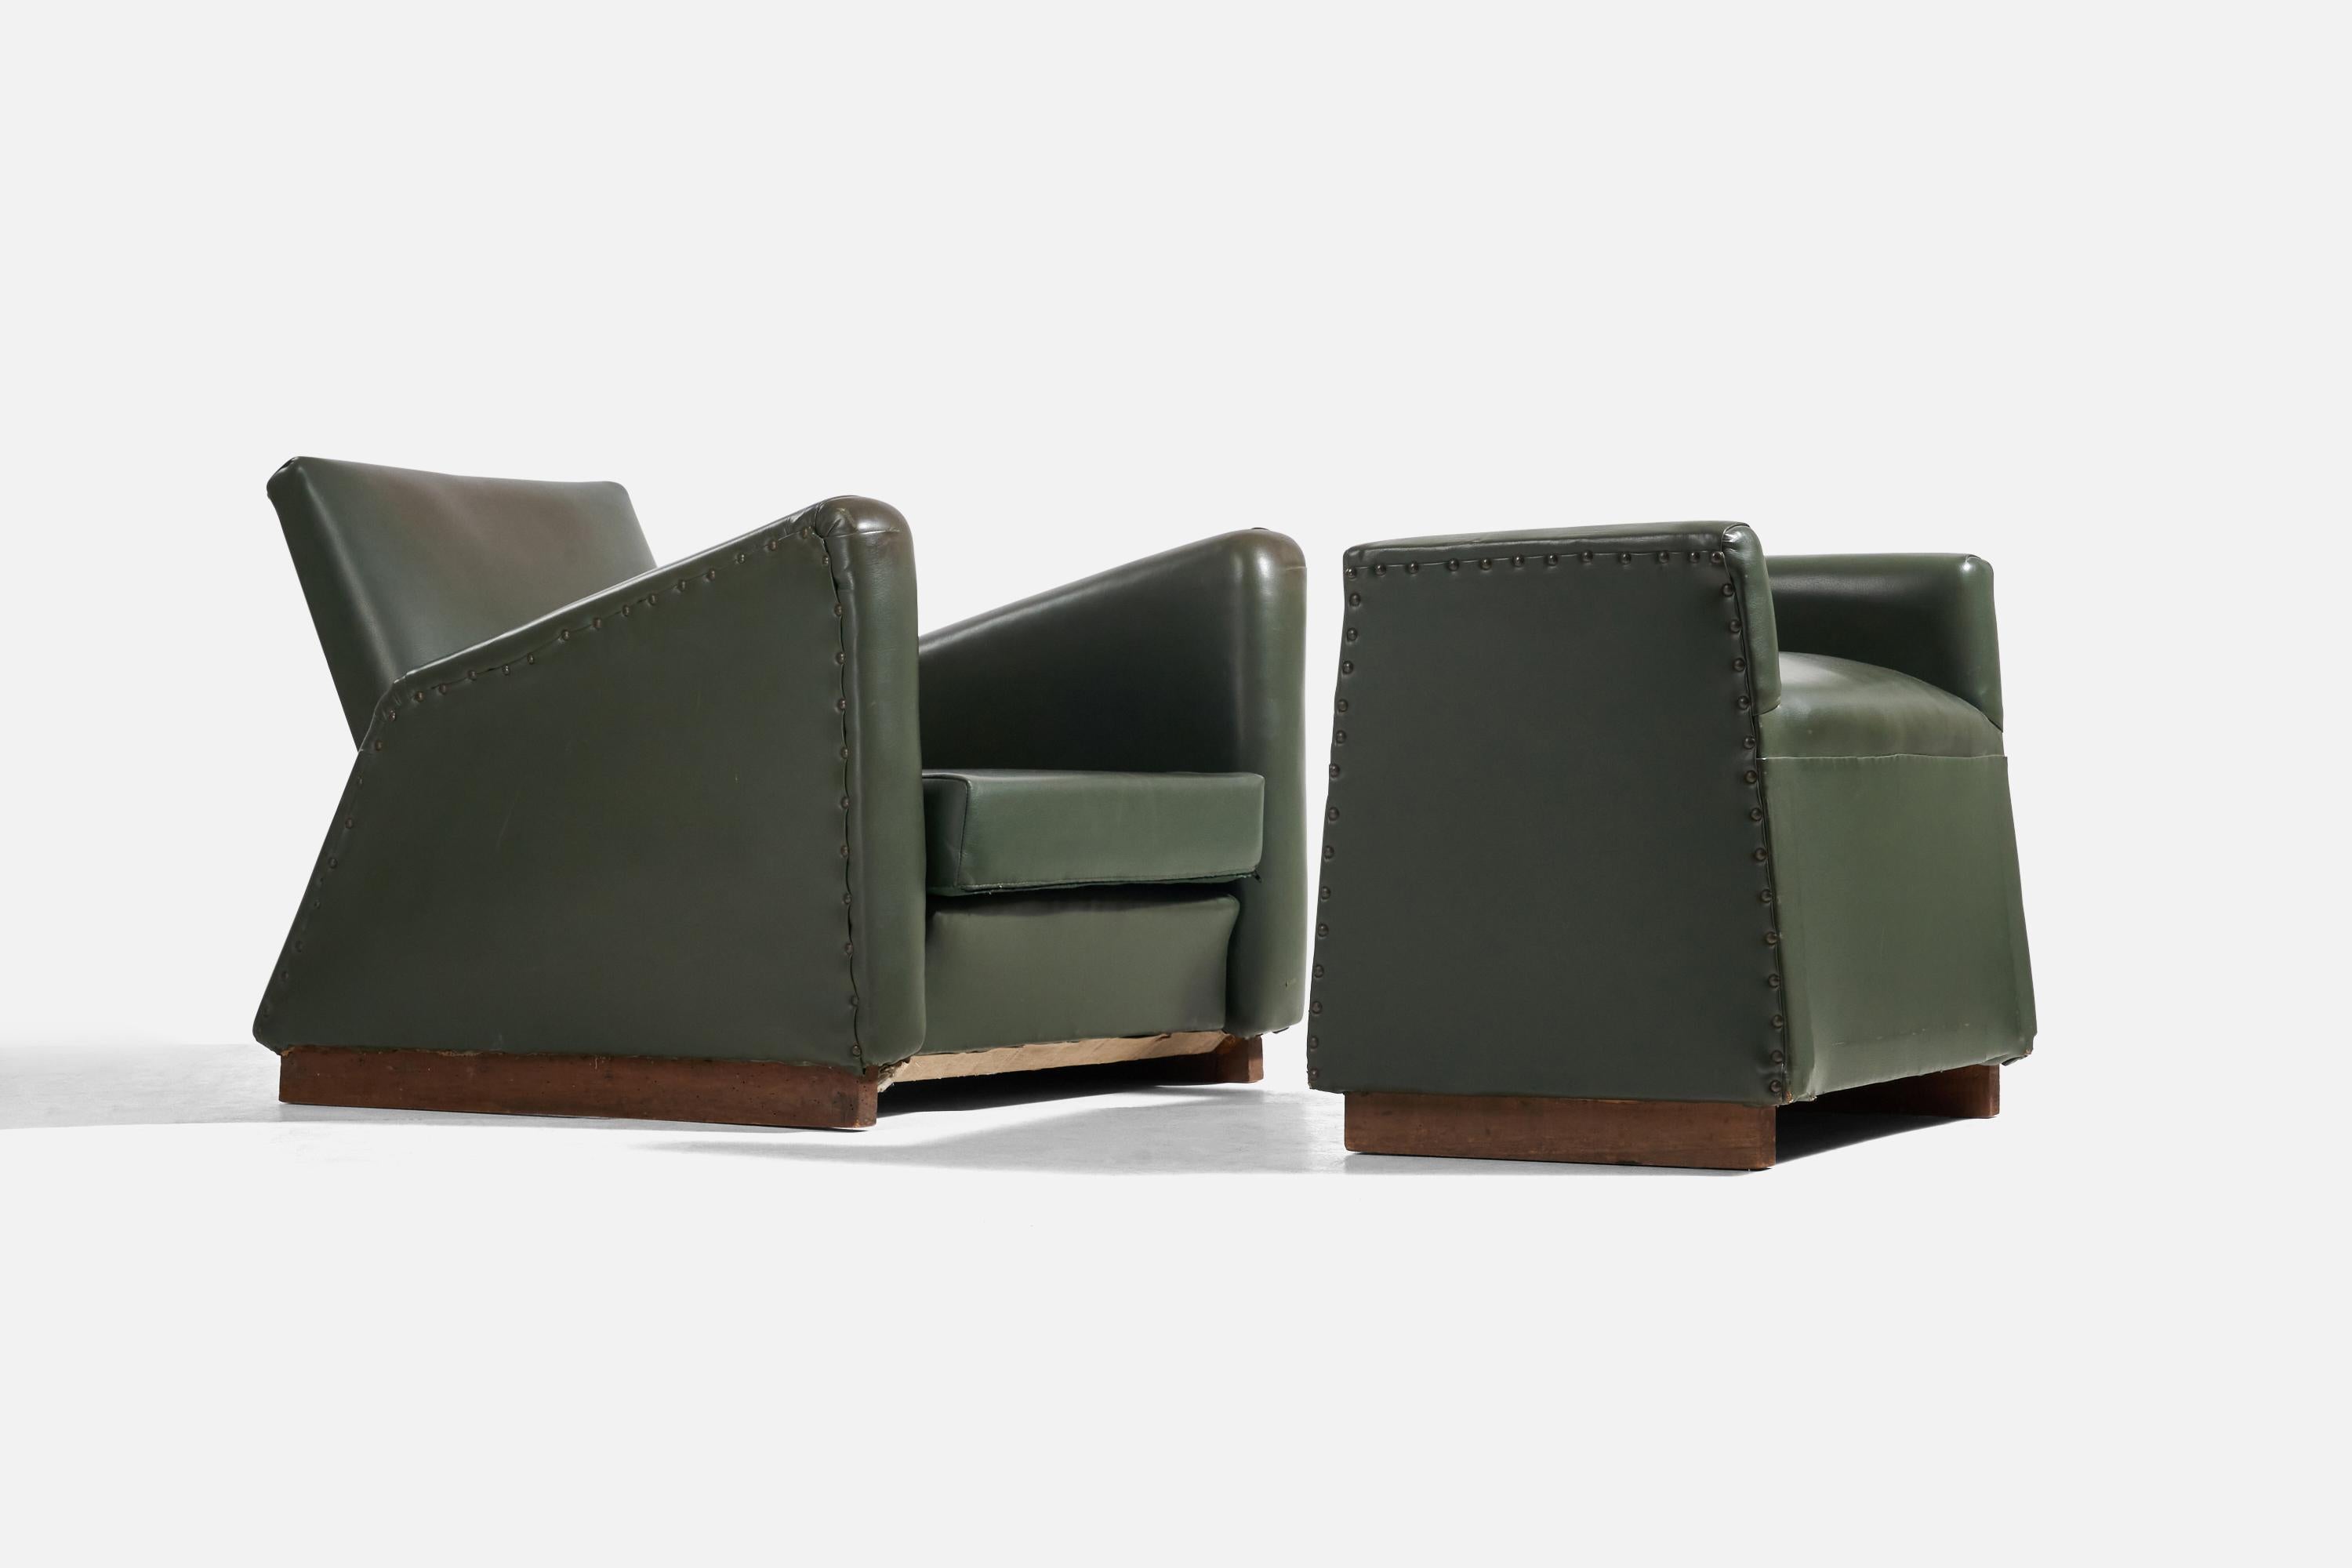 A pair of green leatherette and wood lounge chairs with ottomans, designed and produced by an Italian designer, Italy, 1940s.